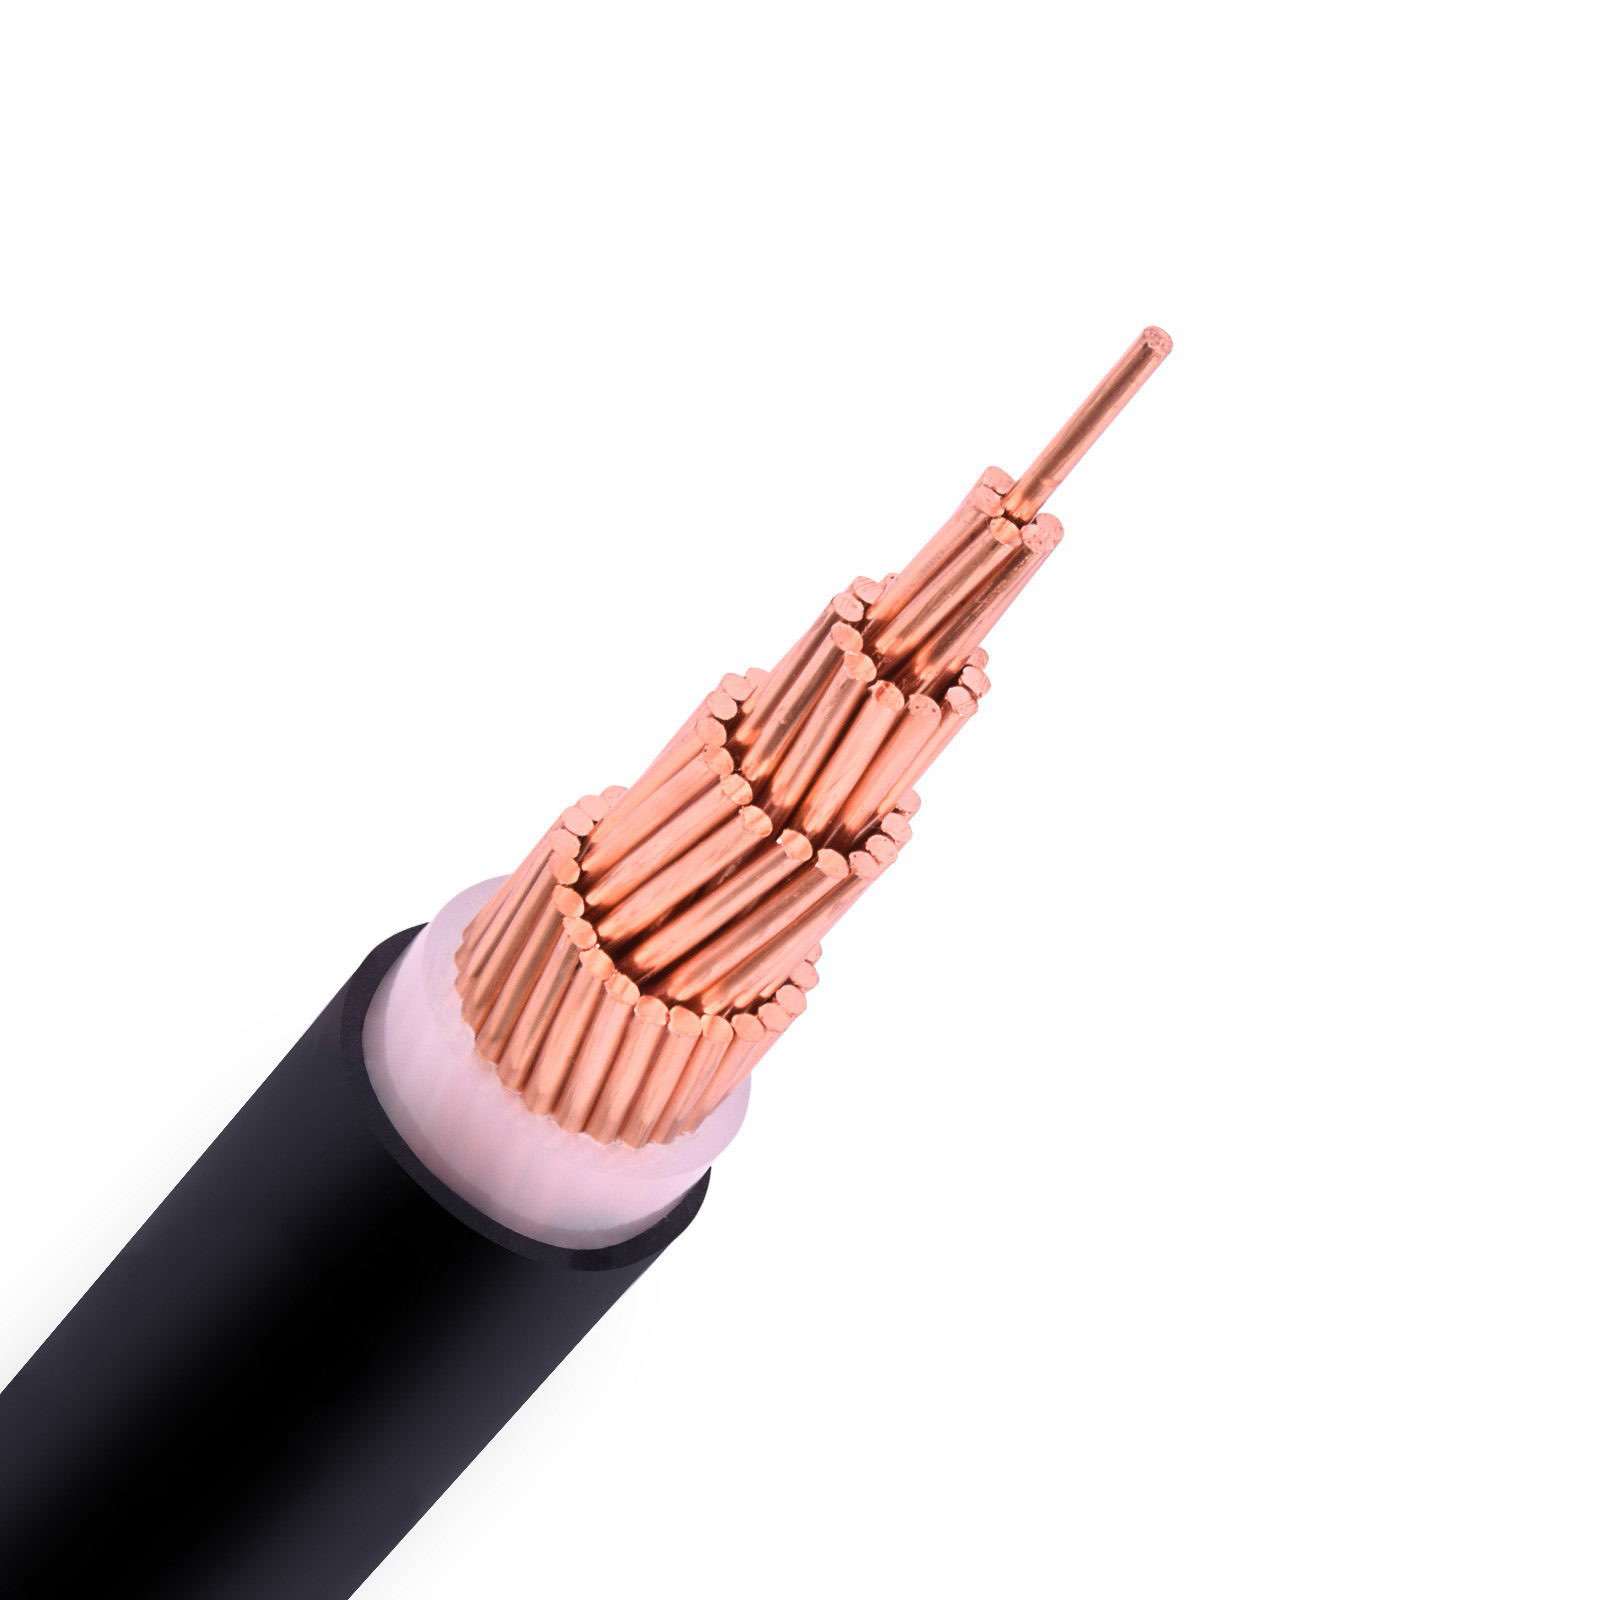 Is The Wire Cable a Power Cable?